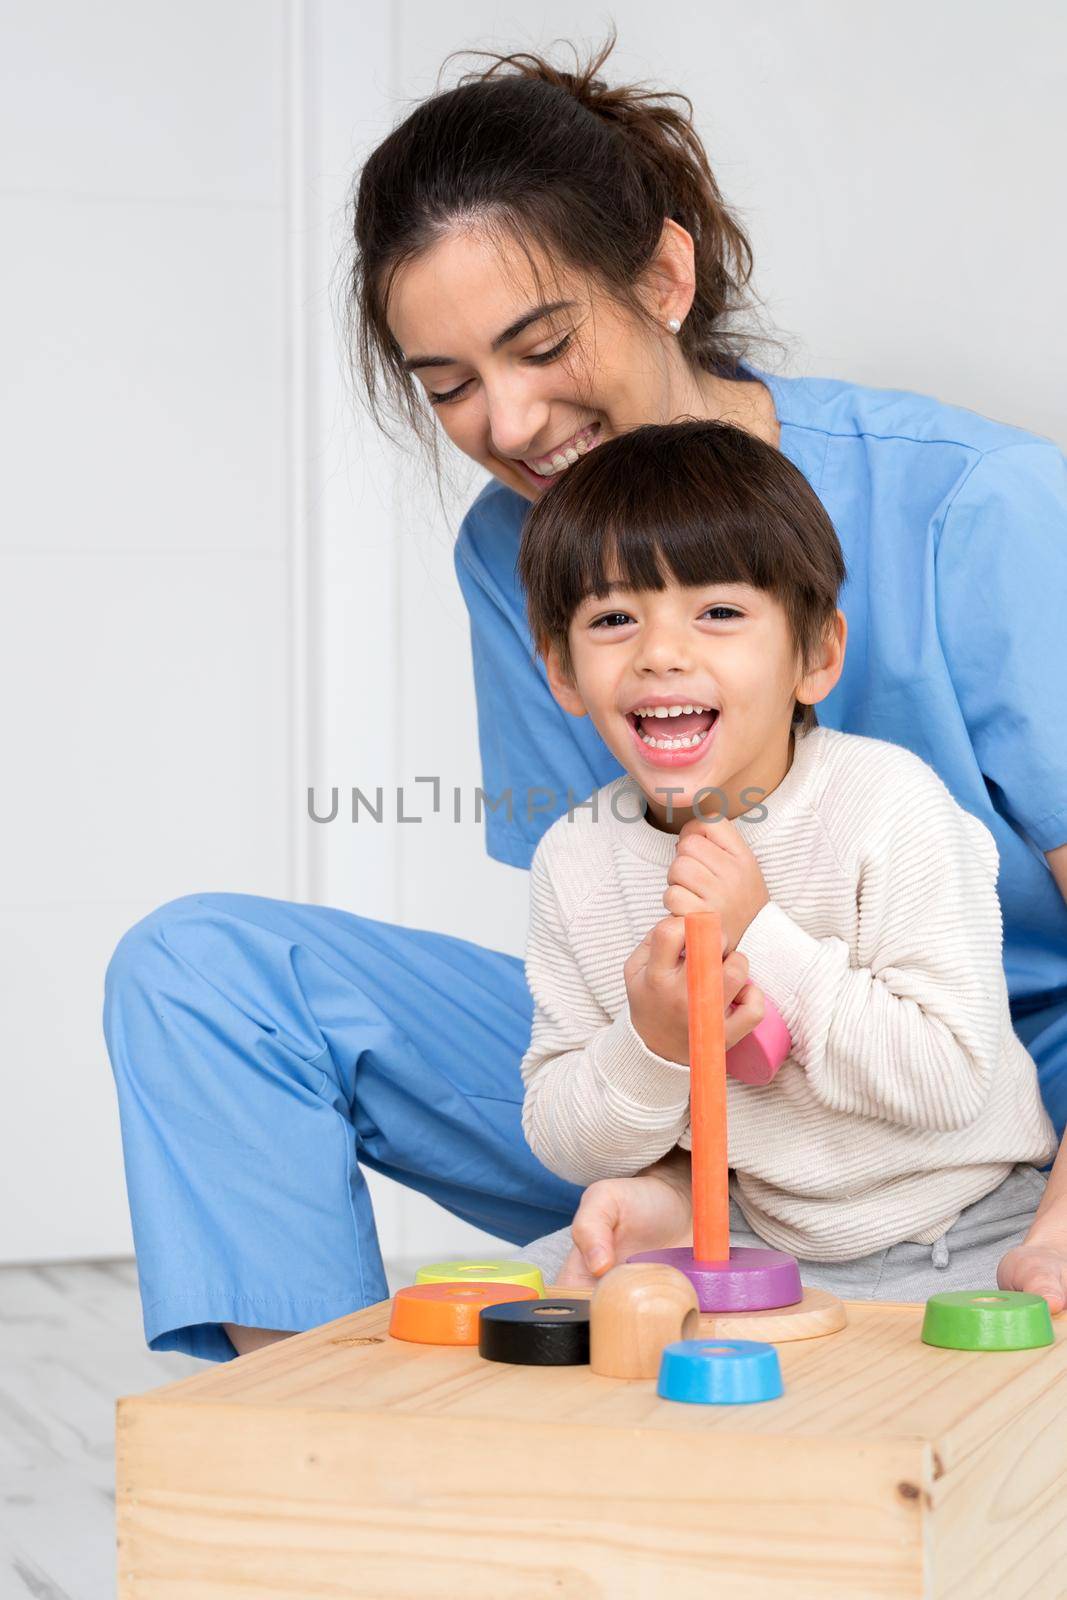 Physical therapist playing with a boy who has cerebral palsy. High quality photo.